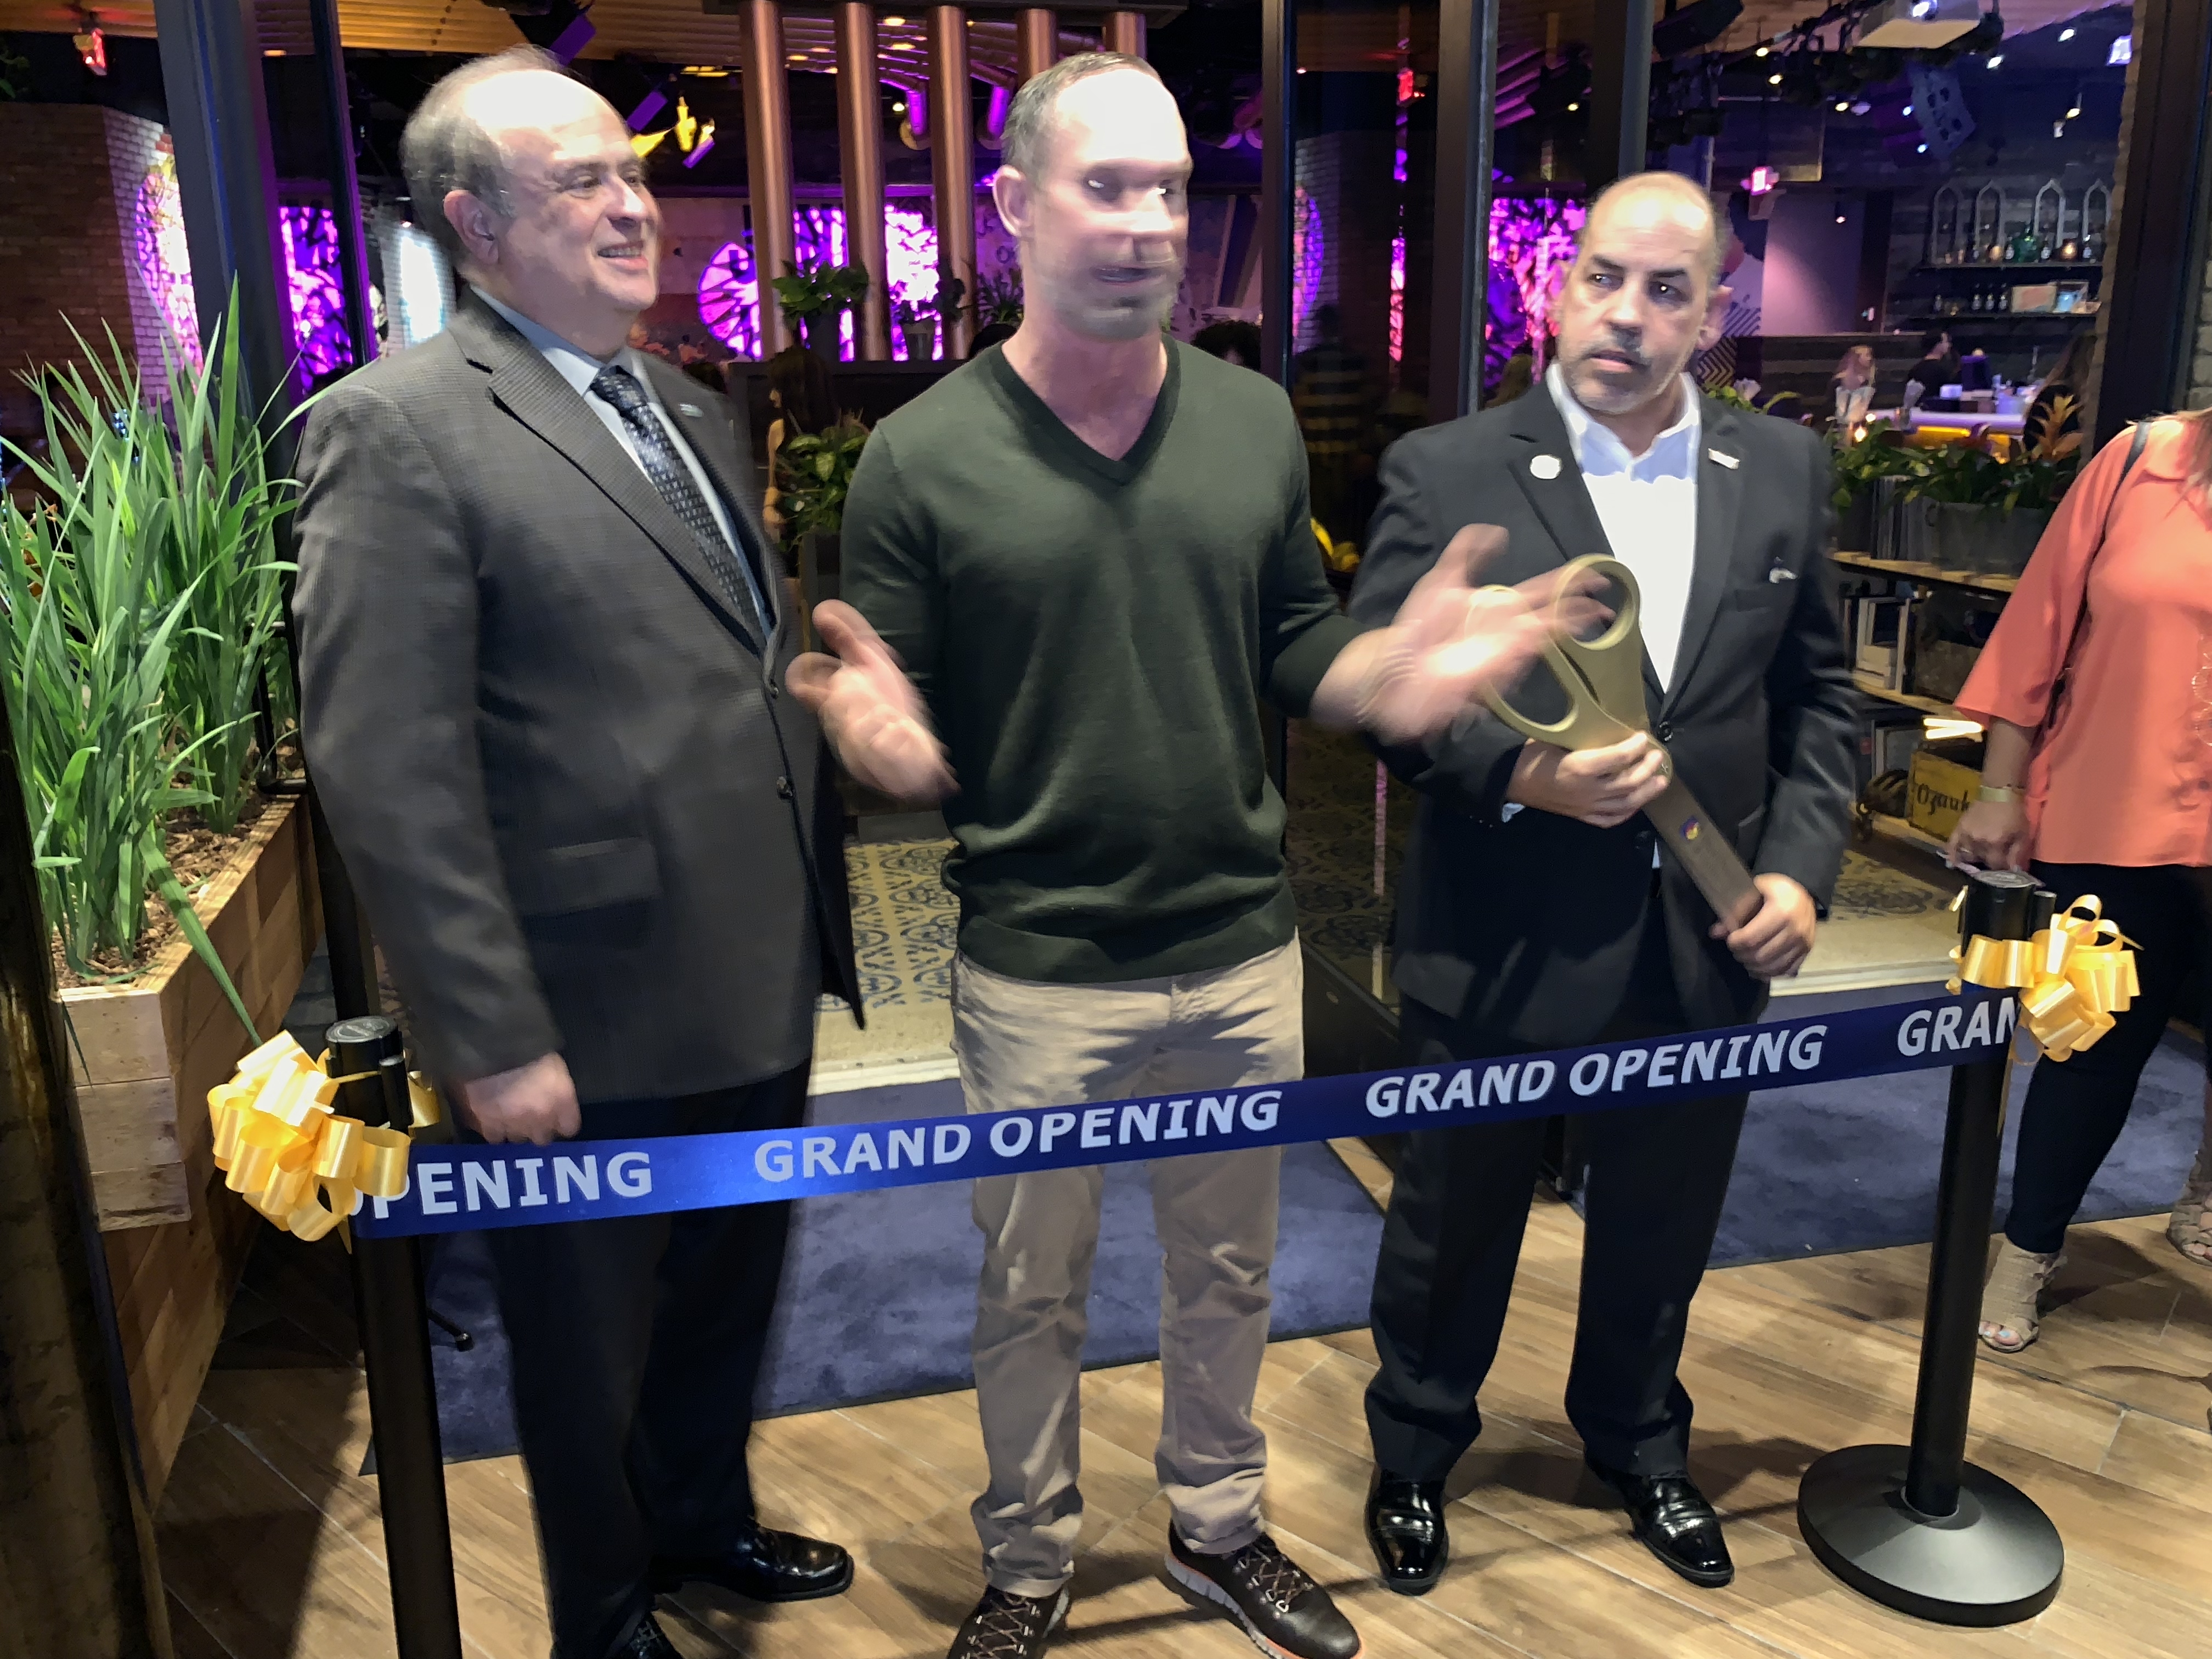 Copper Blues Improv Grand Opening, preparing to cut the ribbon, a Doral Chamber of Commerce event.